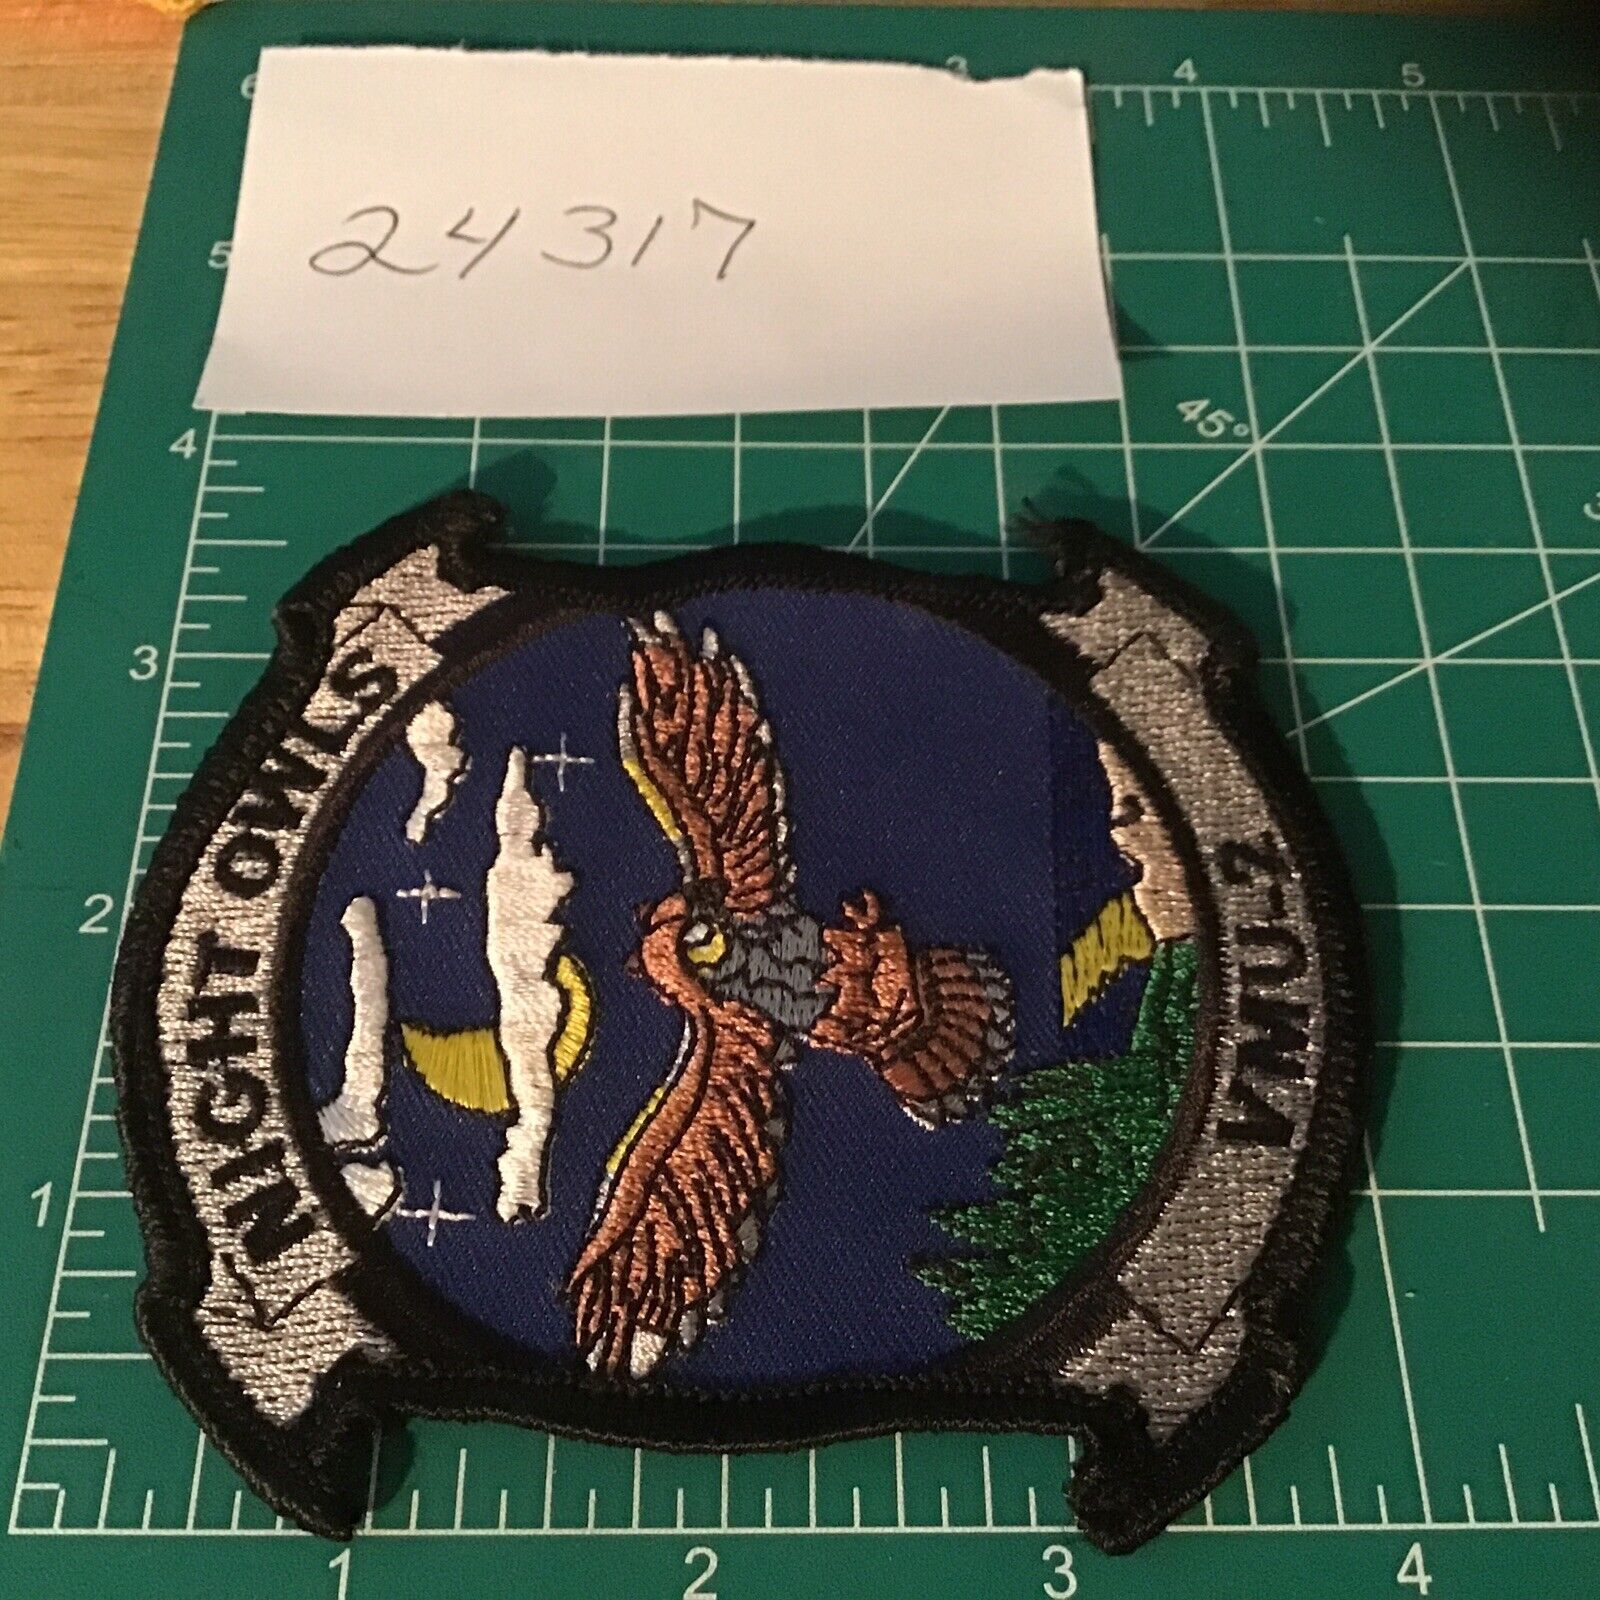 VMU 2 Unmanned Aerial Vehicle Squadron Patch Night Owls Iron On